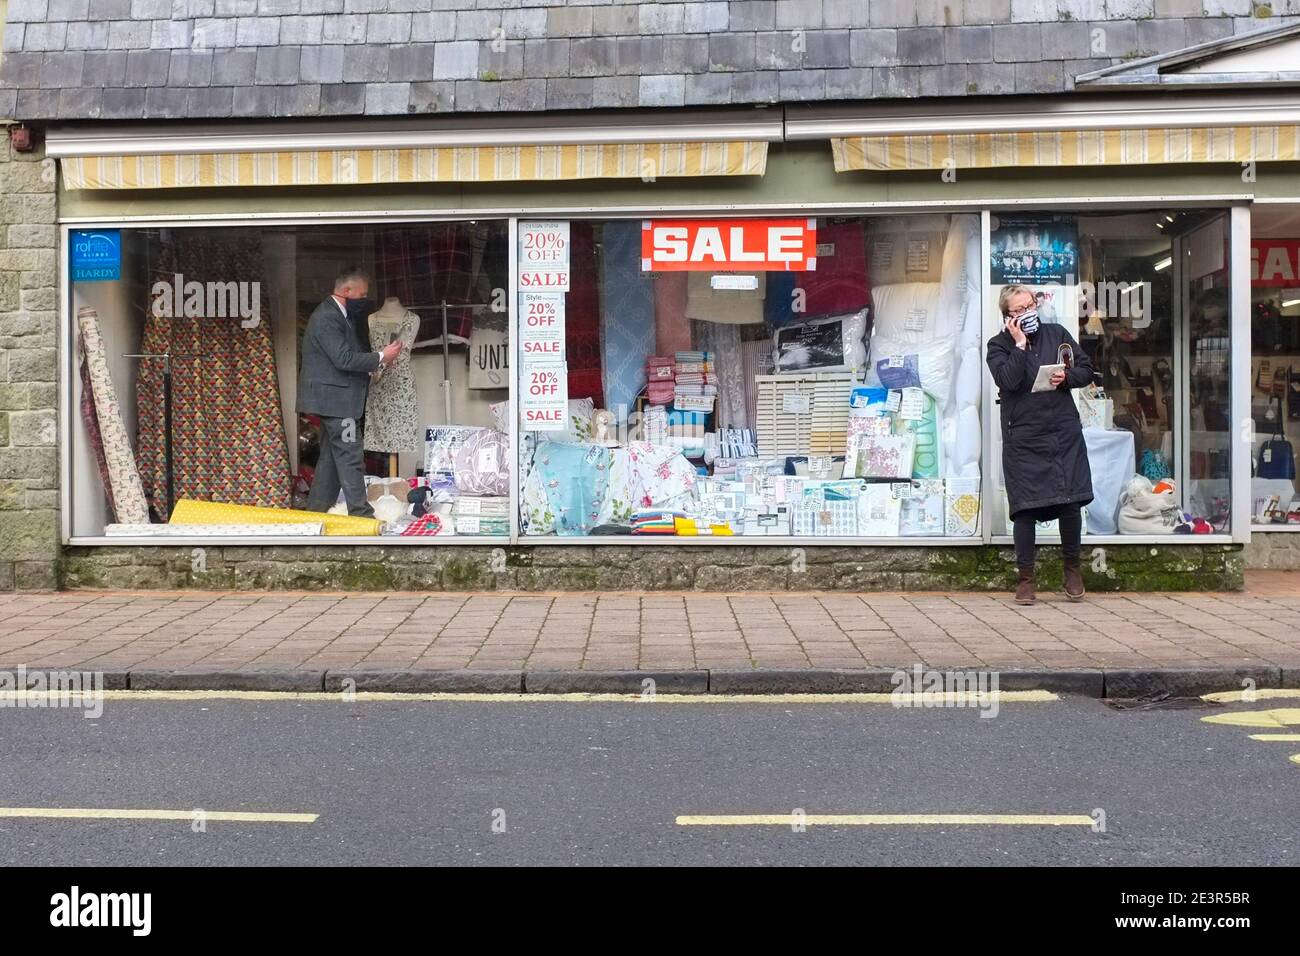 UK gets used to coronavirus restrictions. A masked shopper outside a shop where a masked assistant is preparing the sale window display. December 2020. Stock Photo